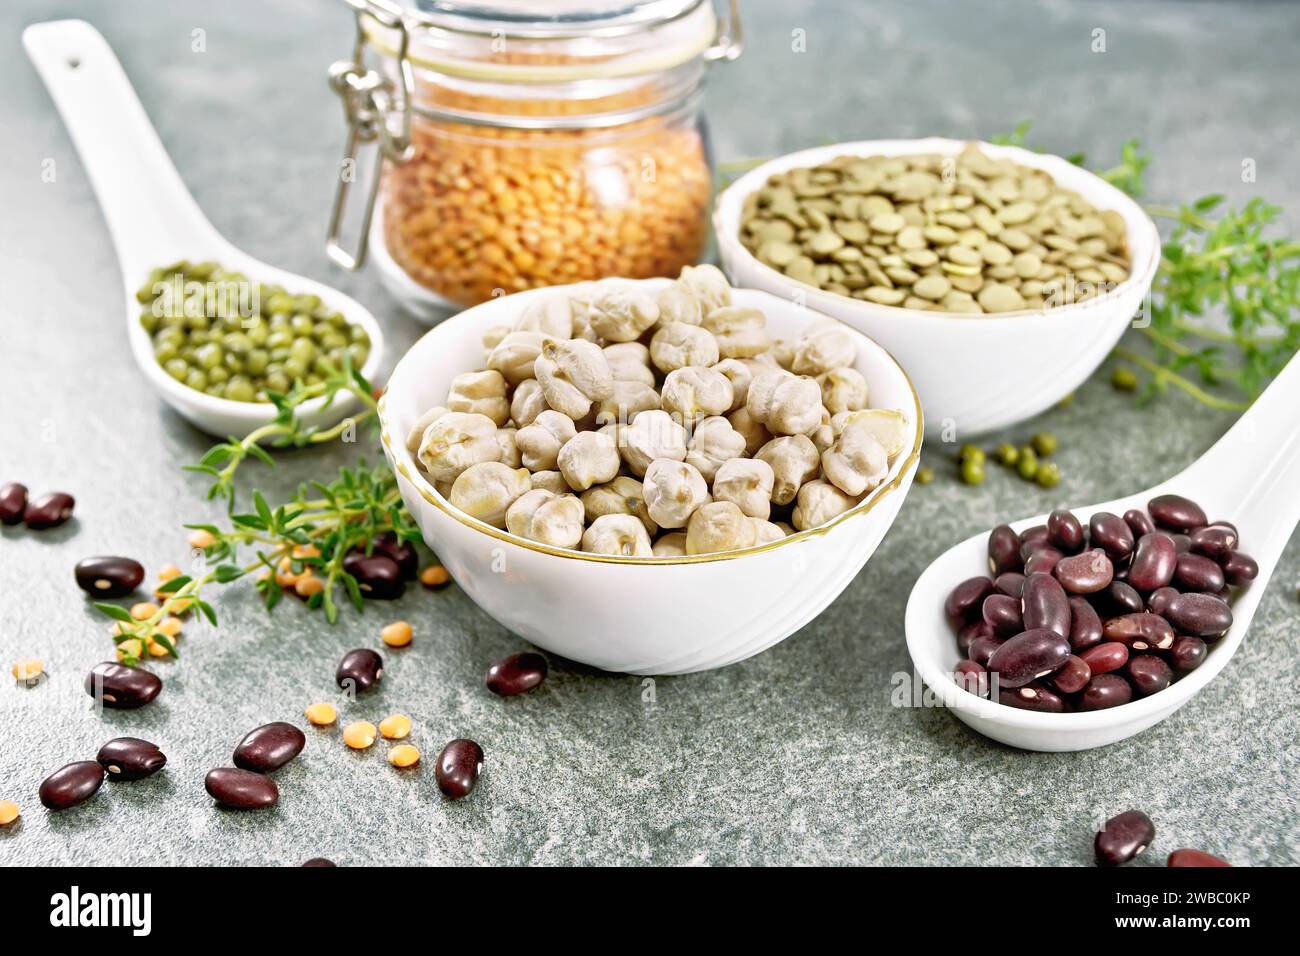 Green lentils and chickpeas in bowls, ruby haricot and mung beans in spoons, red lentils in a glass jar, thyme sprigs on the background of a stone tab Stock Photo